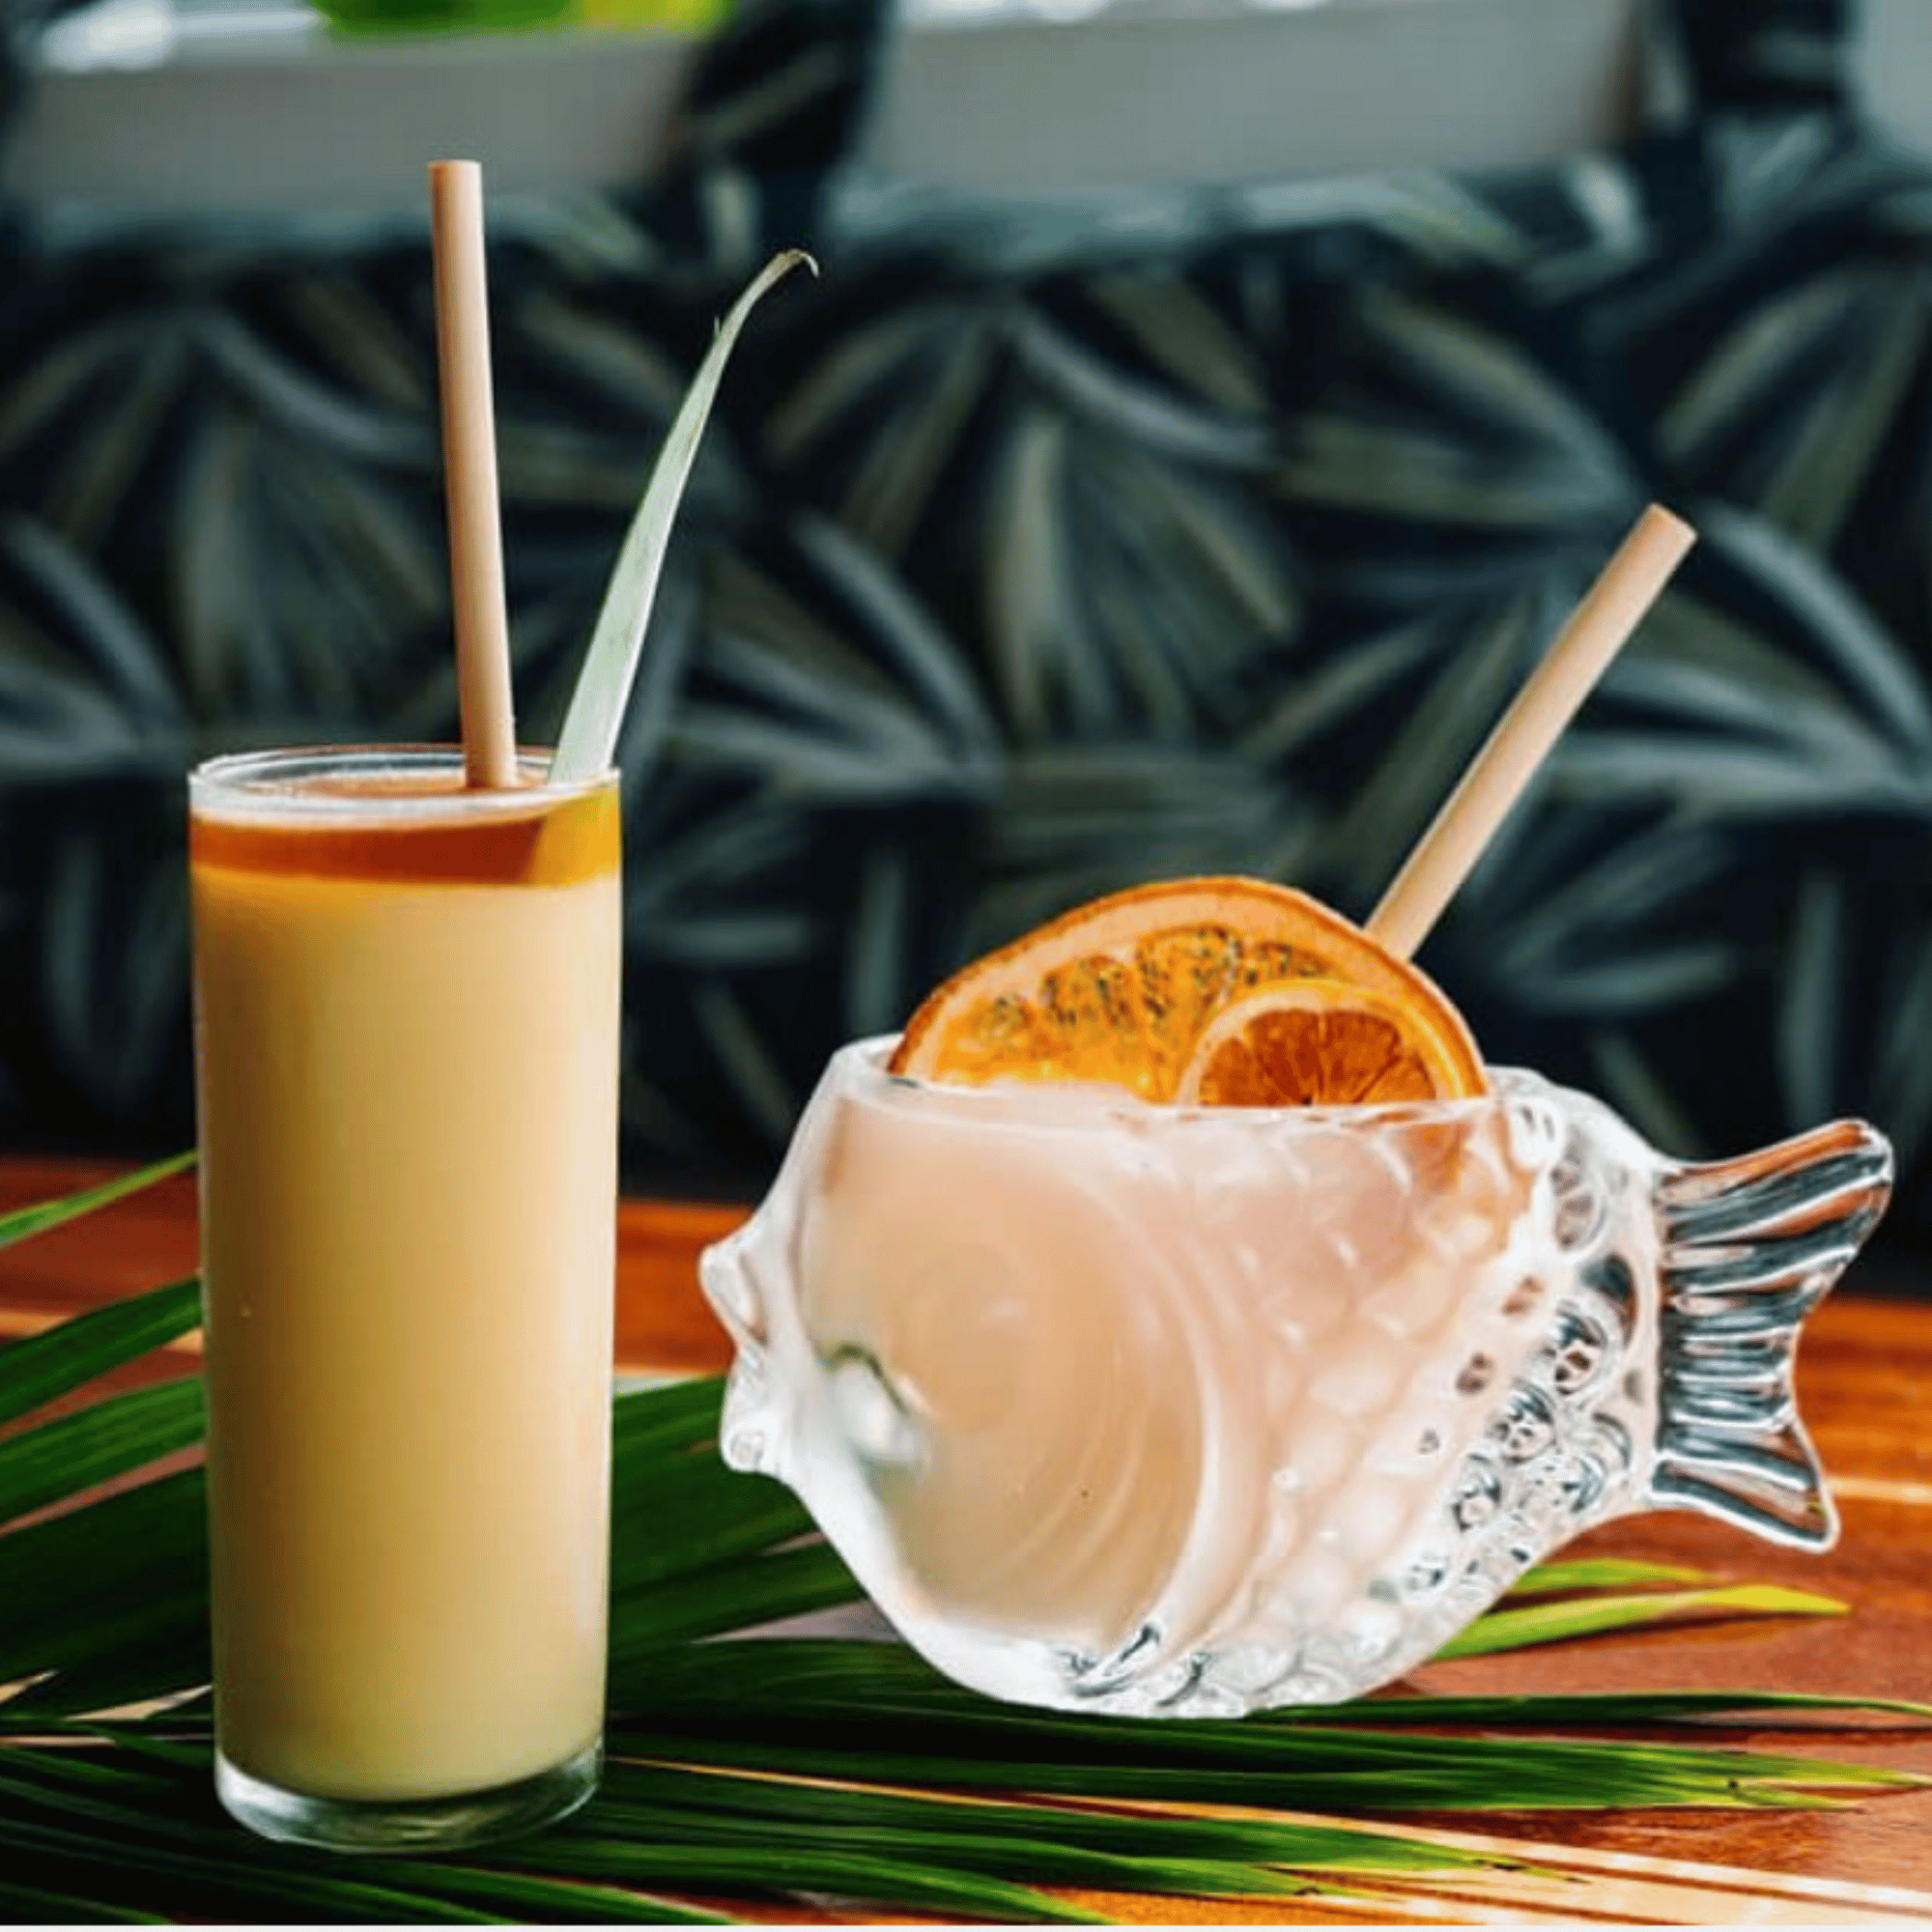 A tall cocktail with a caramel-colored rim and a pineapple leaf garnish is placed beside a clear fish-shaped glass filled with a frozen drink, garnished with dried citrus slices. Both drinks contain bamboo-like straws made from reed stems, which emphasize sustainability. The drinks are set on a wooden surface adorned with tropical leaves, and the blurred background features leaf-patterned upholstery, creating a vibrant and relaxed tropical setting.